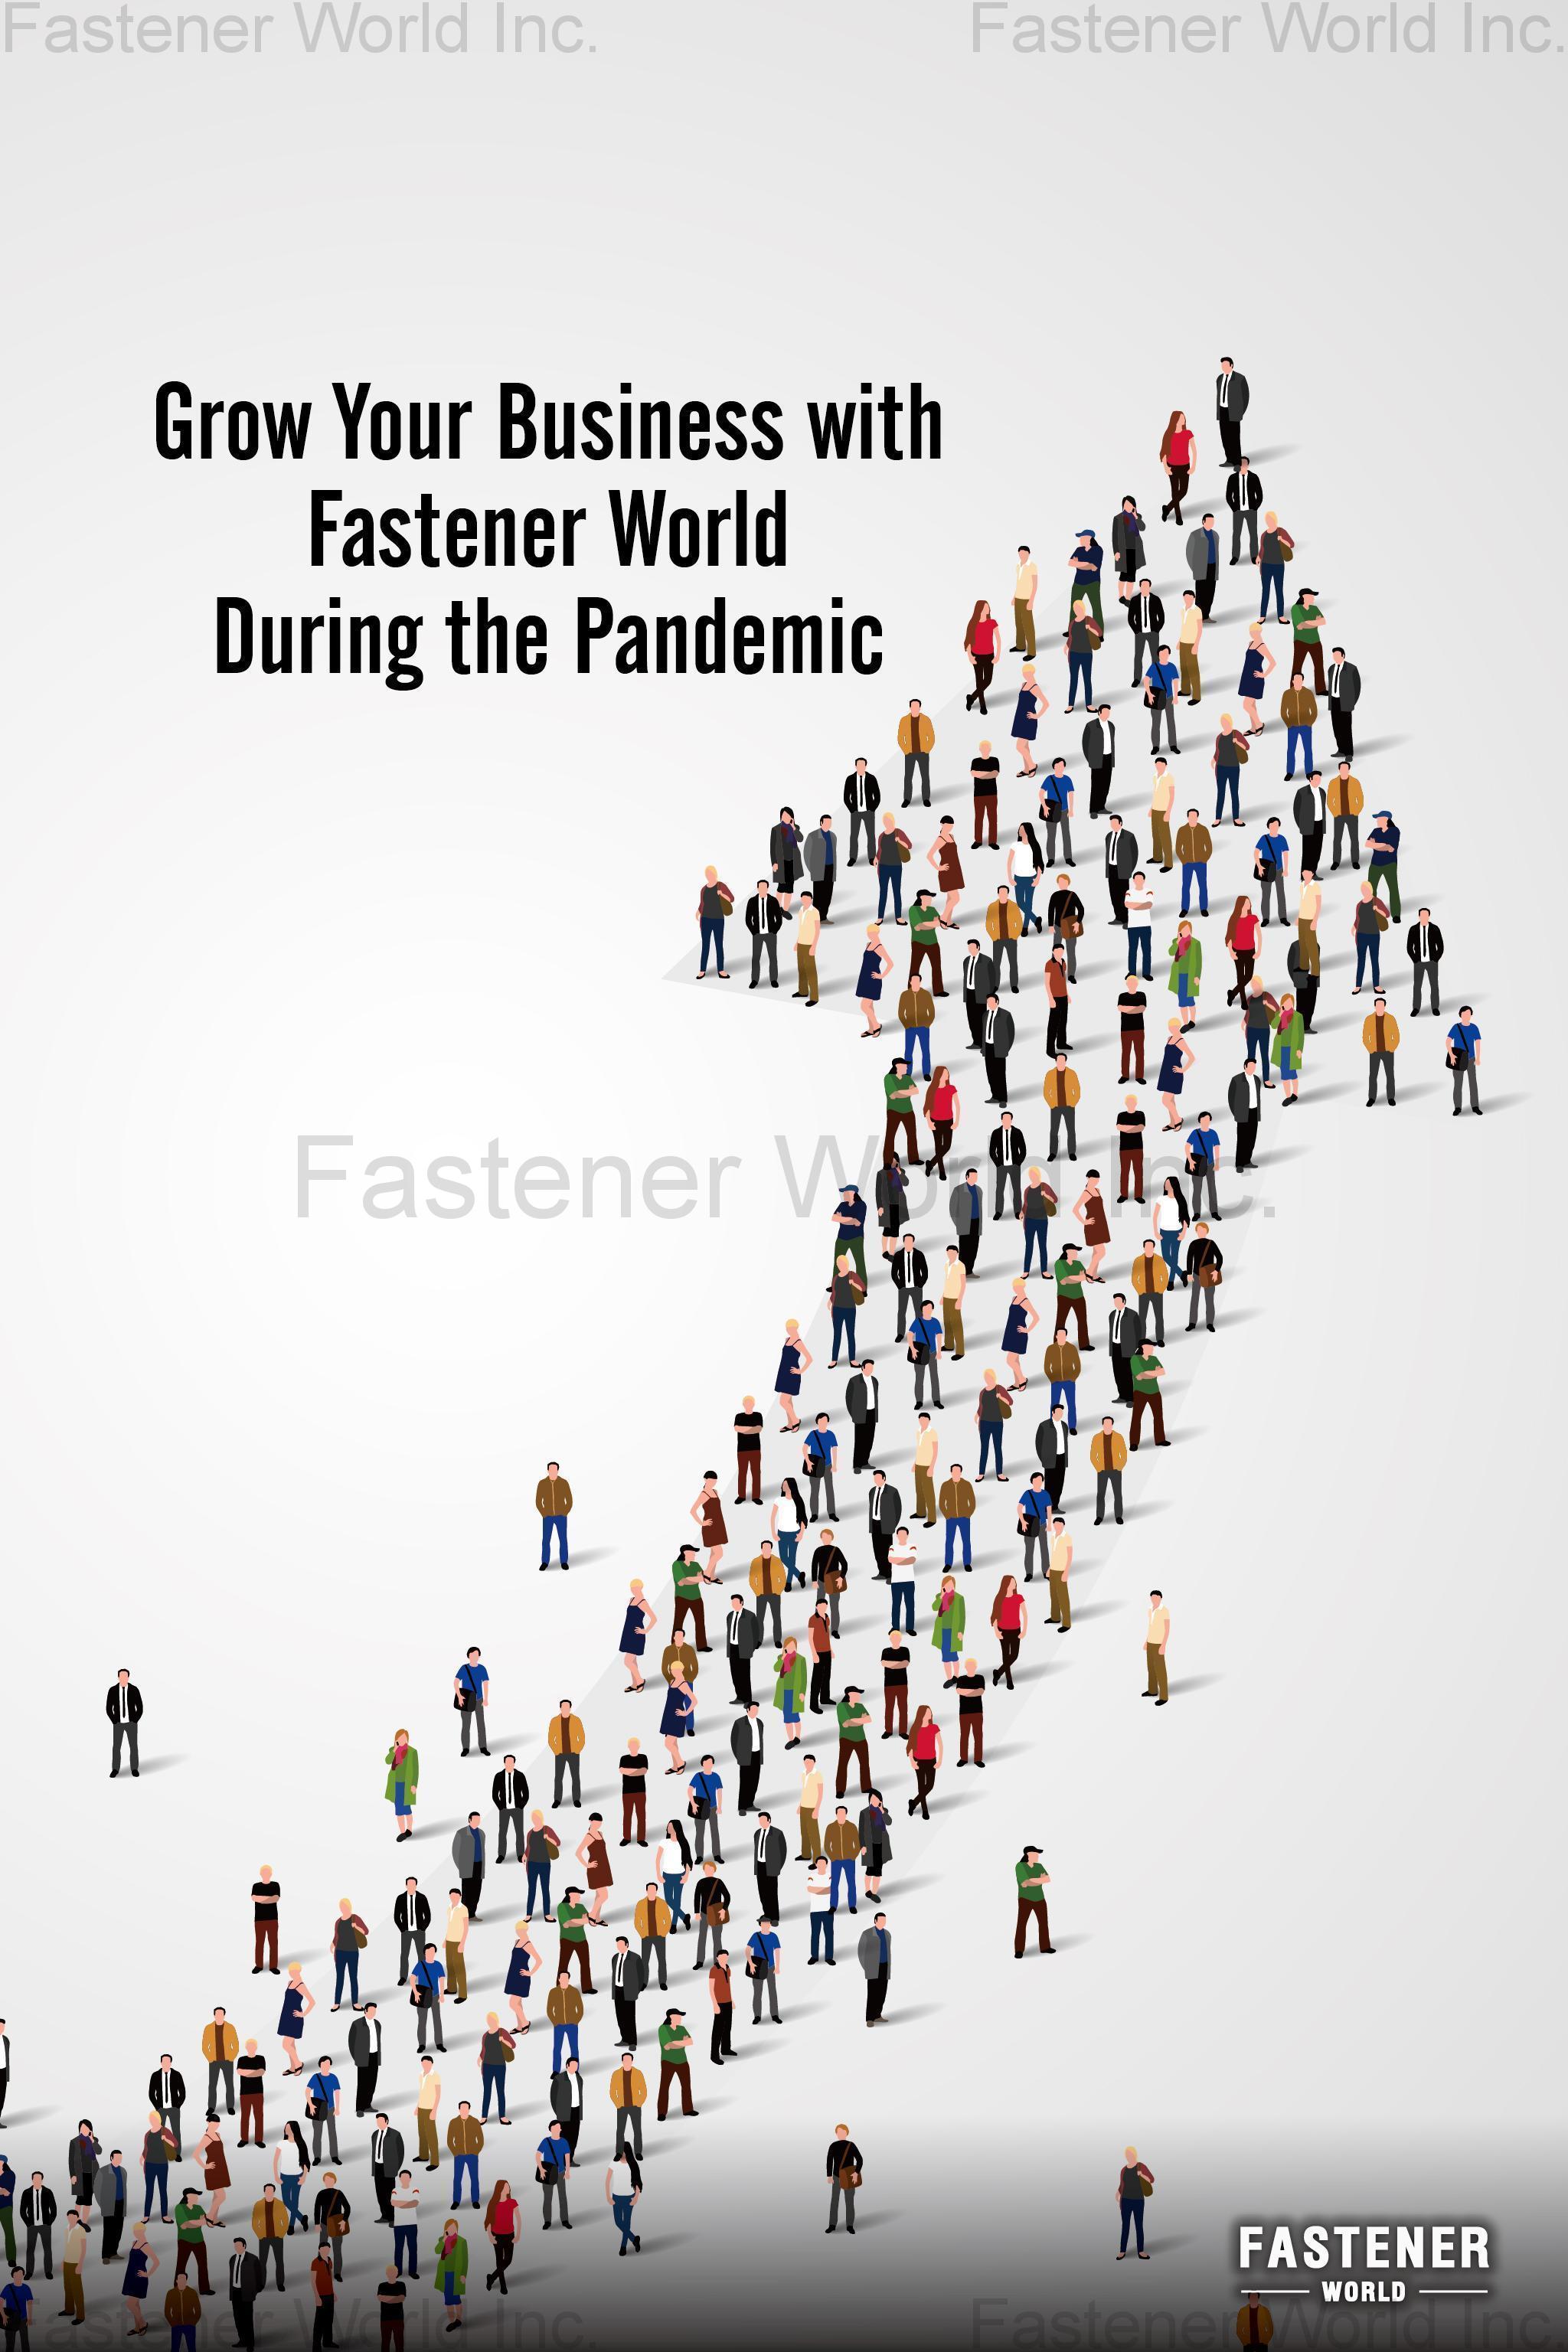 FASTENER WORLD INC. , Grow Your Business with Fastener World During the Pandemic